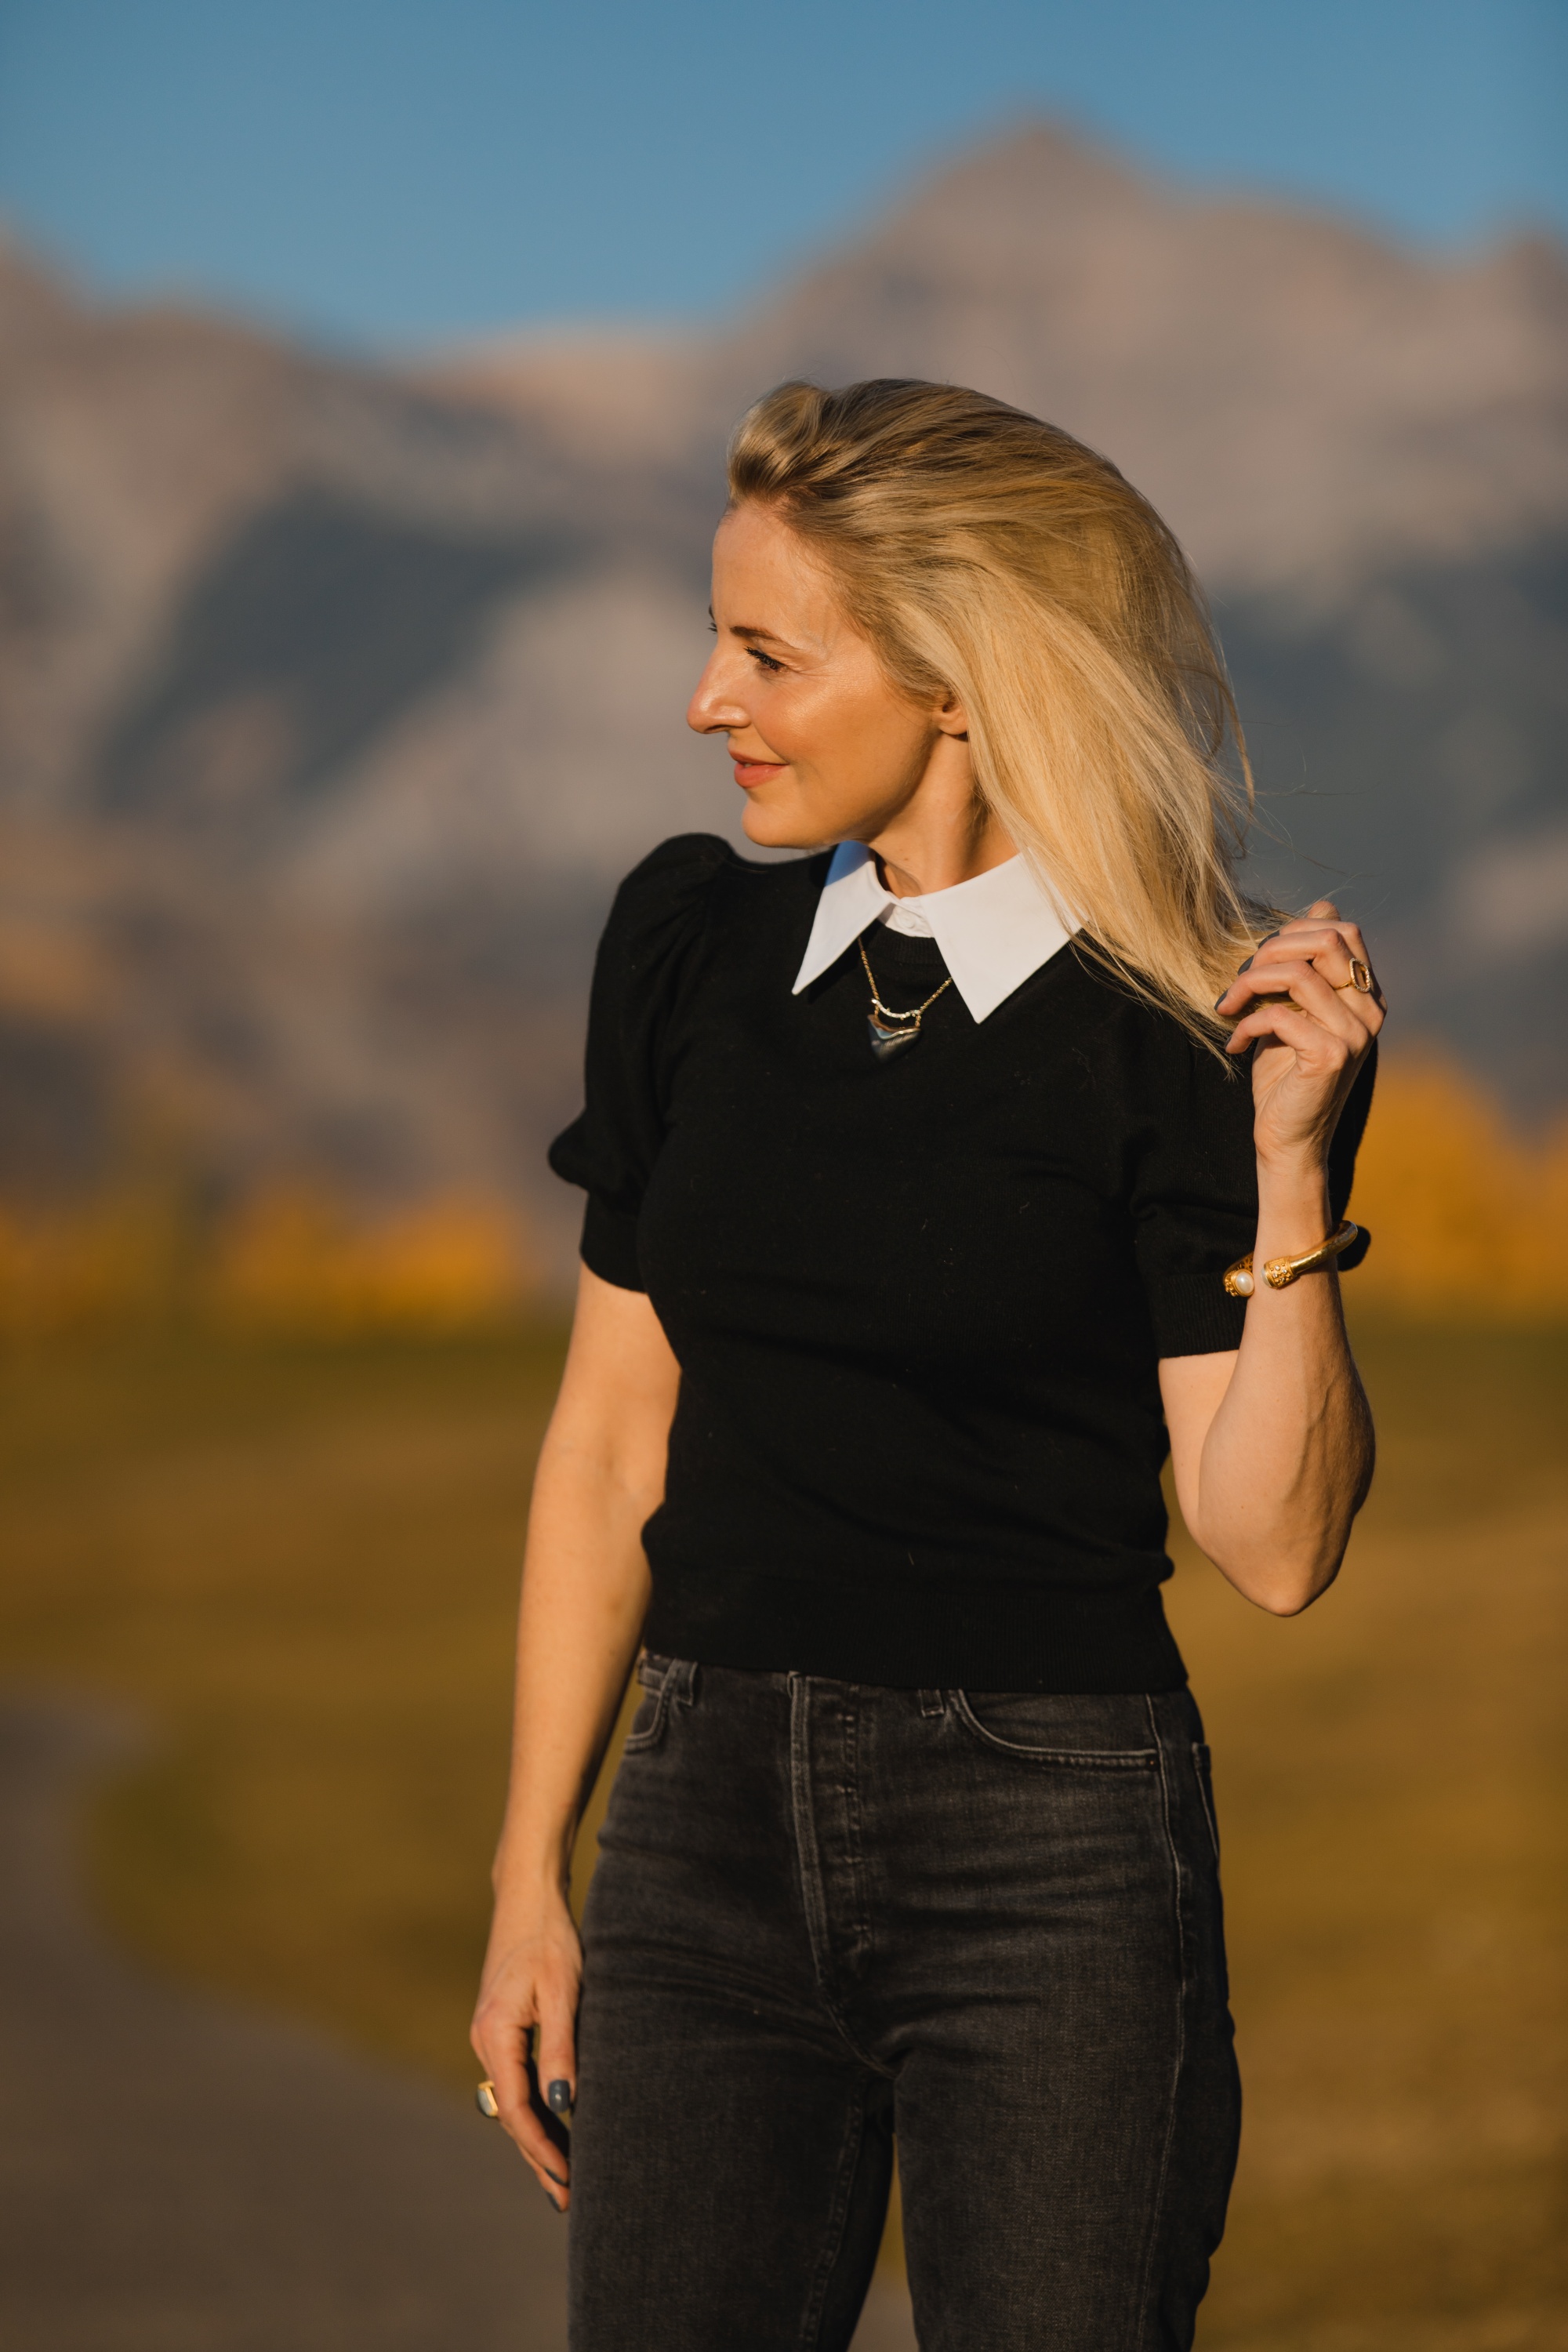 Layered Sweater, Erin Busbee of Busbee Style wearing a black puff shoulder layered sweater by Alice + Olivia with gray wash Agolde Nico jeans in Telluride, Colorado